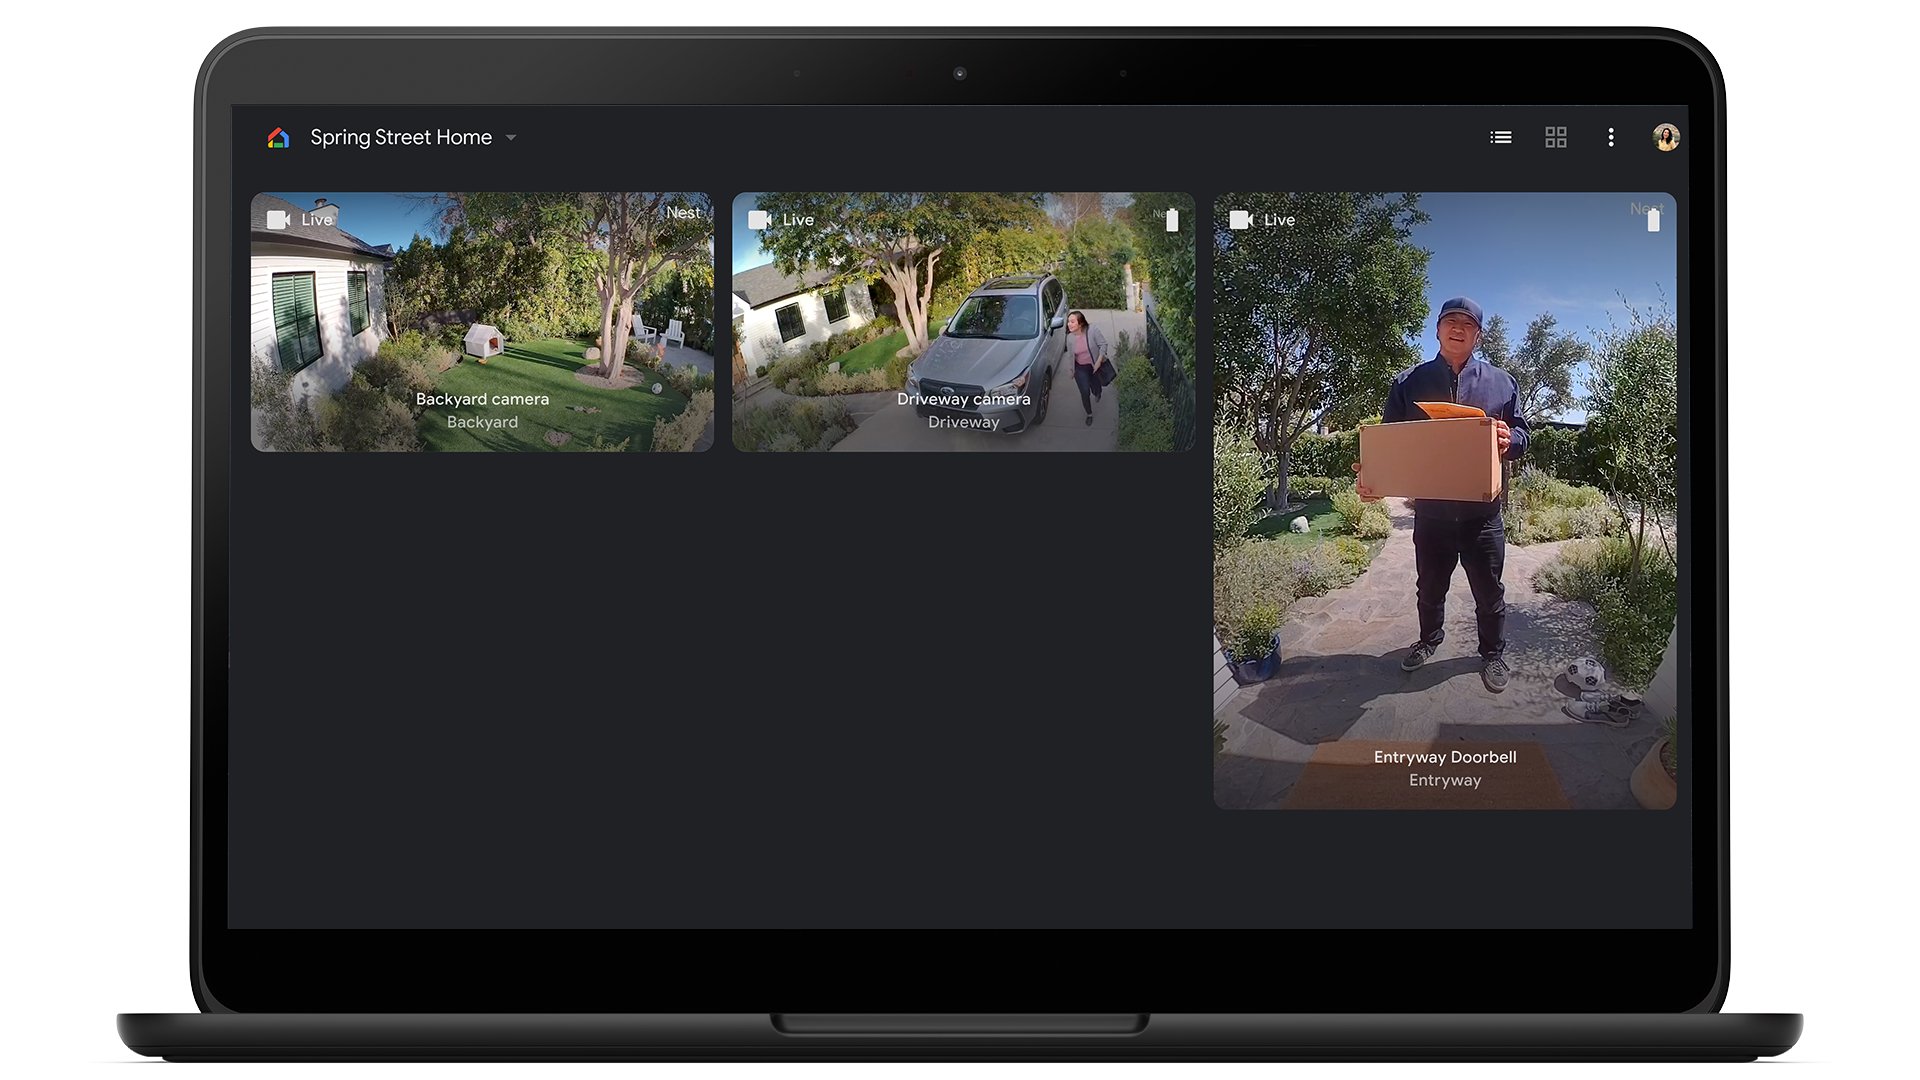 Google House net app begins rolling out to view Nest digital camera feeds